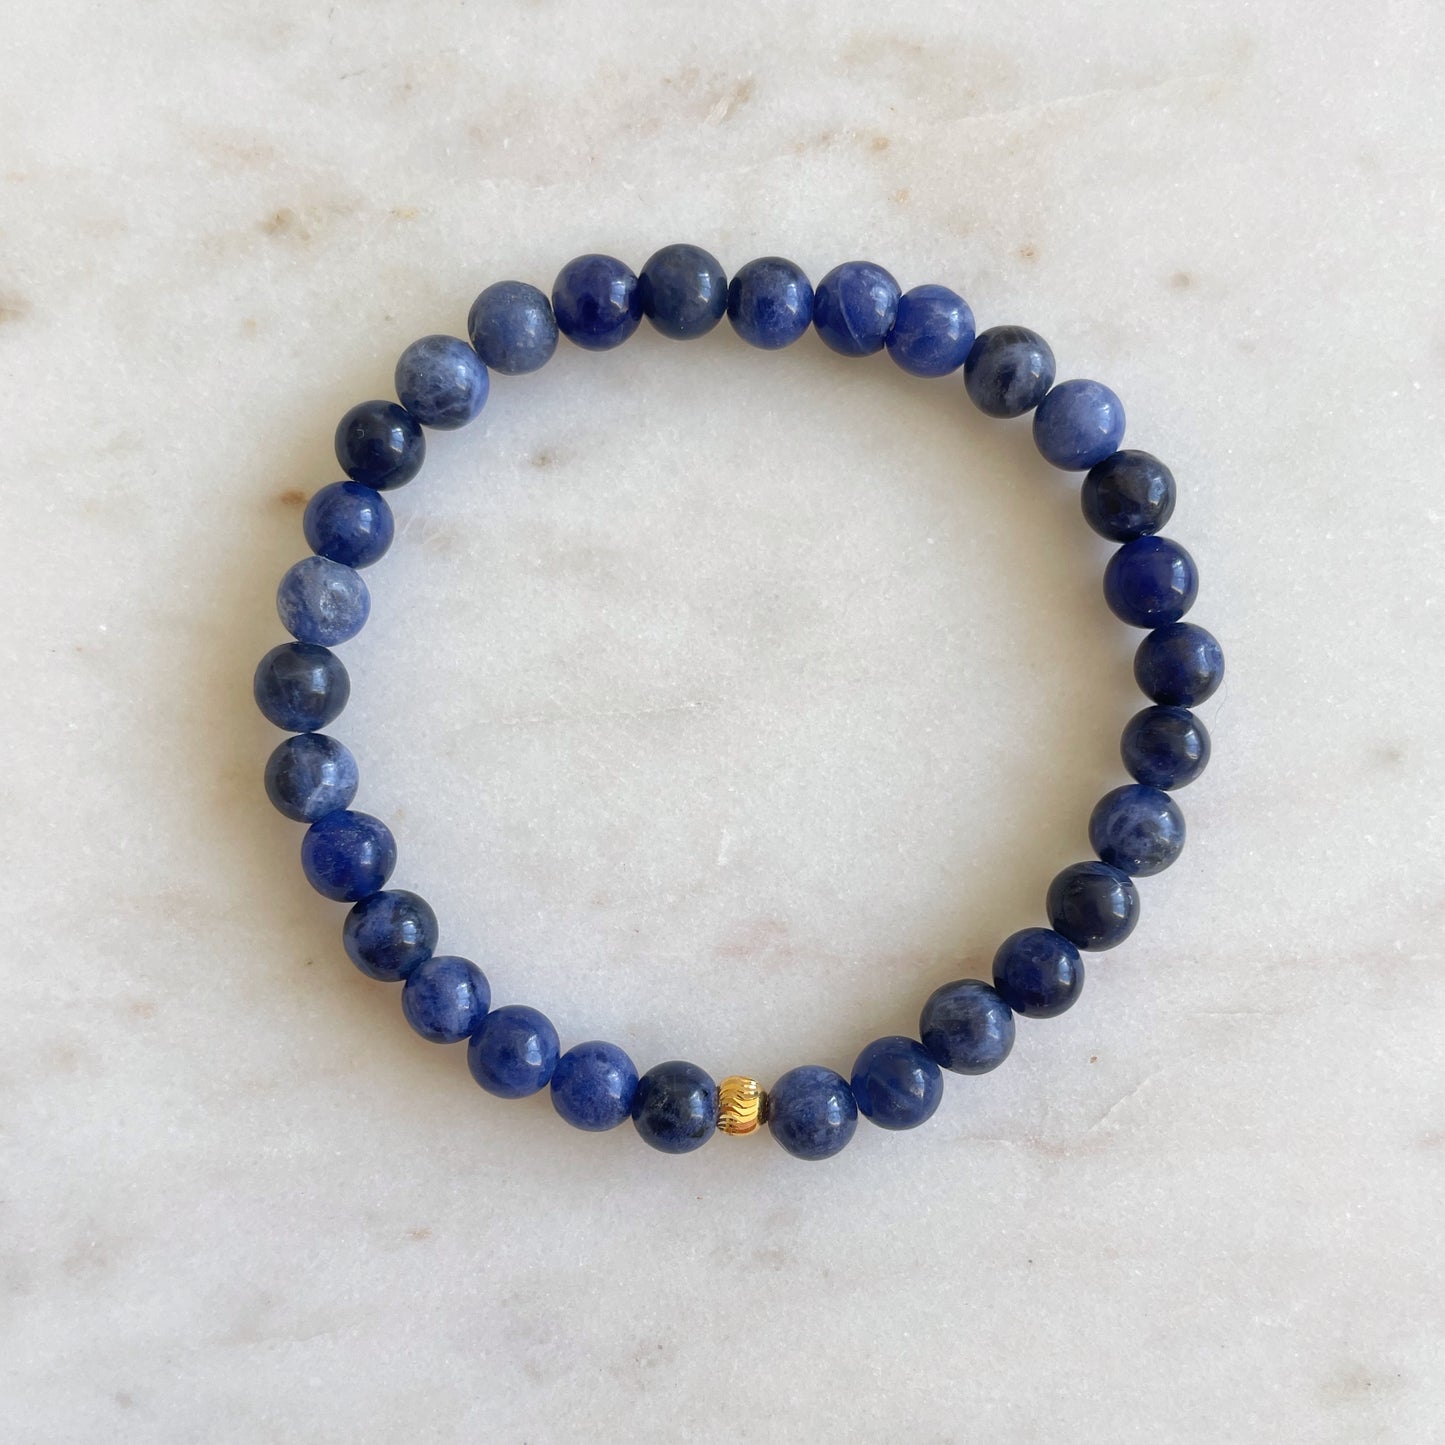 Full Moon - Sodalite bracelet for clarity and emotional balance